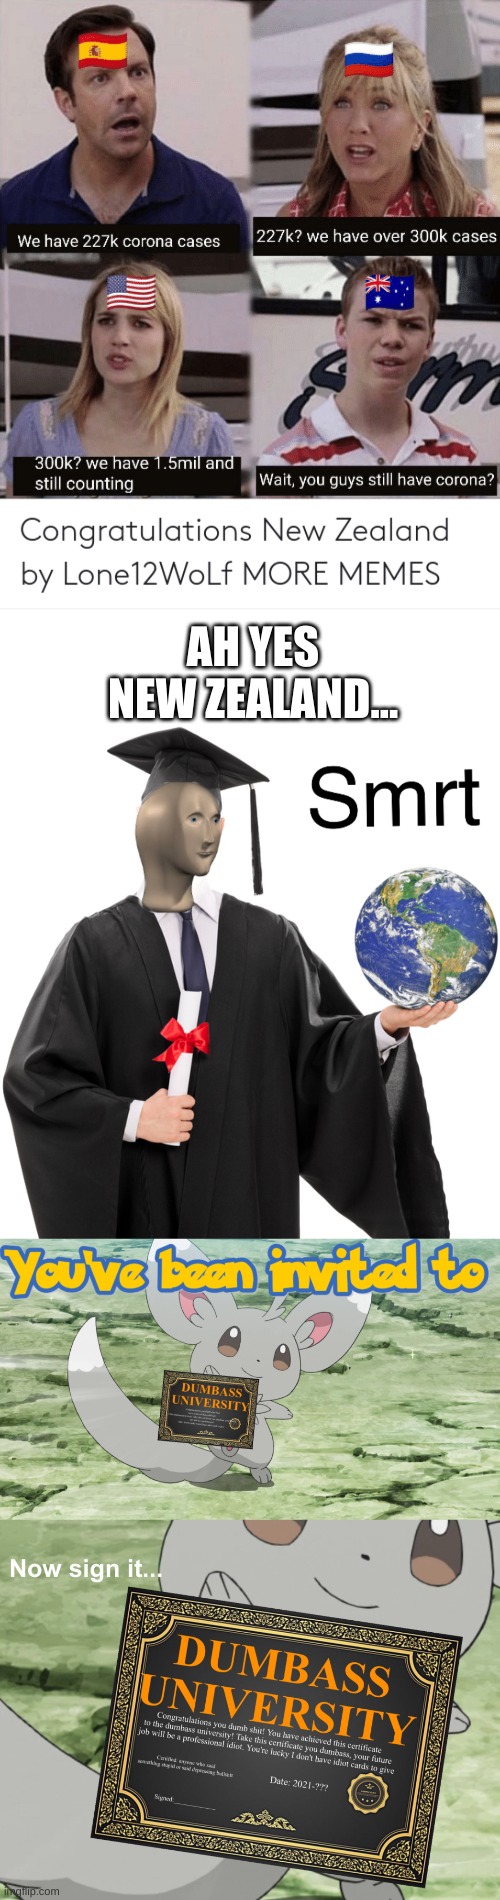 for yall's information, its the wrong flag | AH YES NEW ZEALAND... | image tagged in meme man smart,you've been invited to dumbass university,coronavirus,stupid,new zealand,australia | made w/ Imgflip meme maker